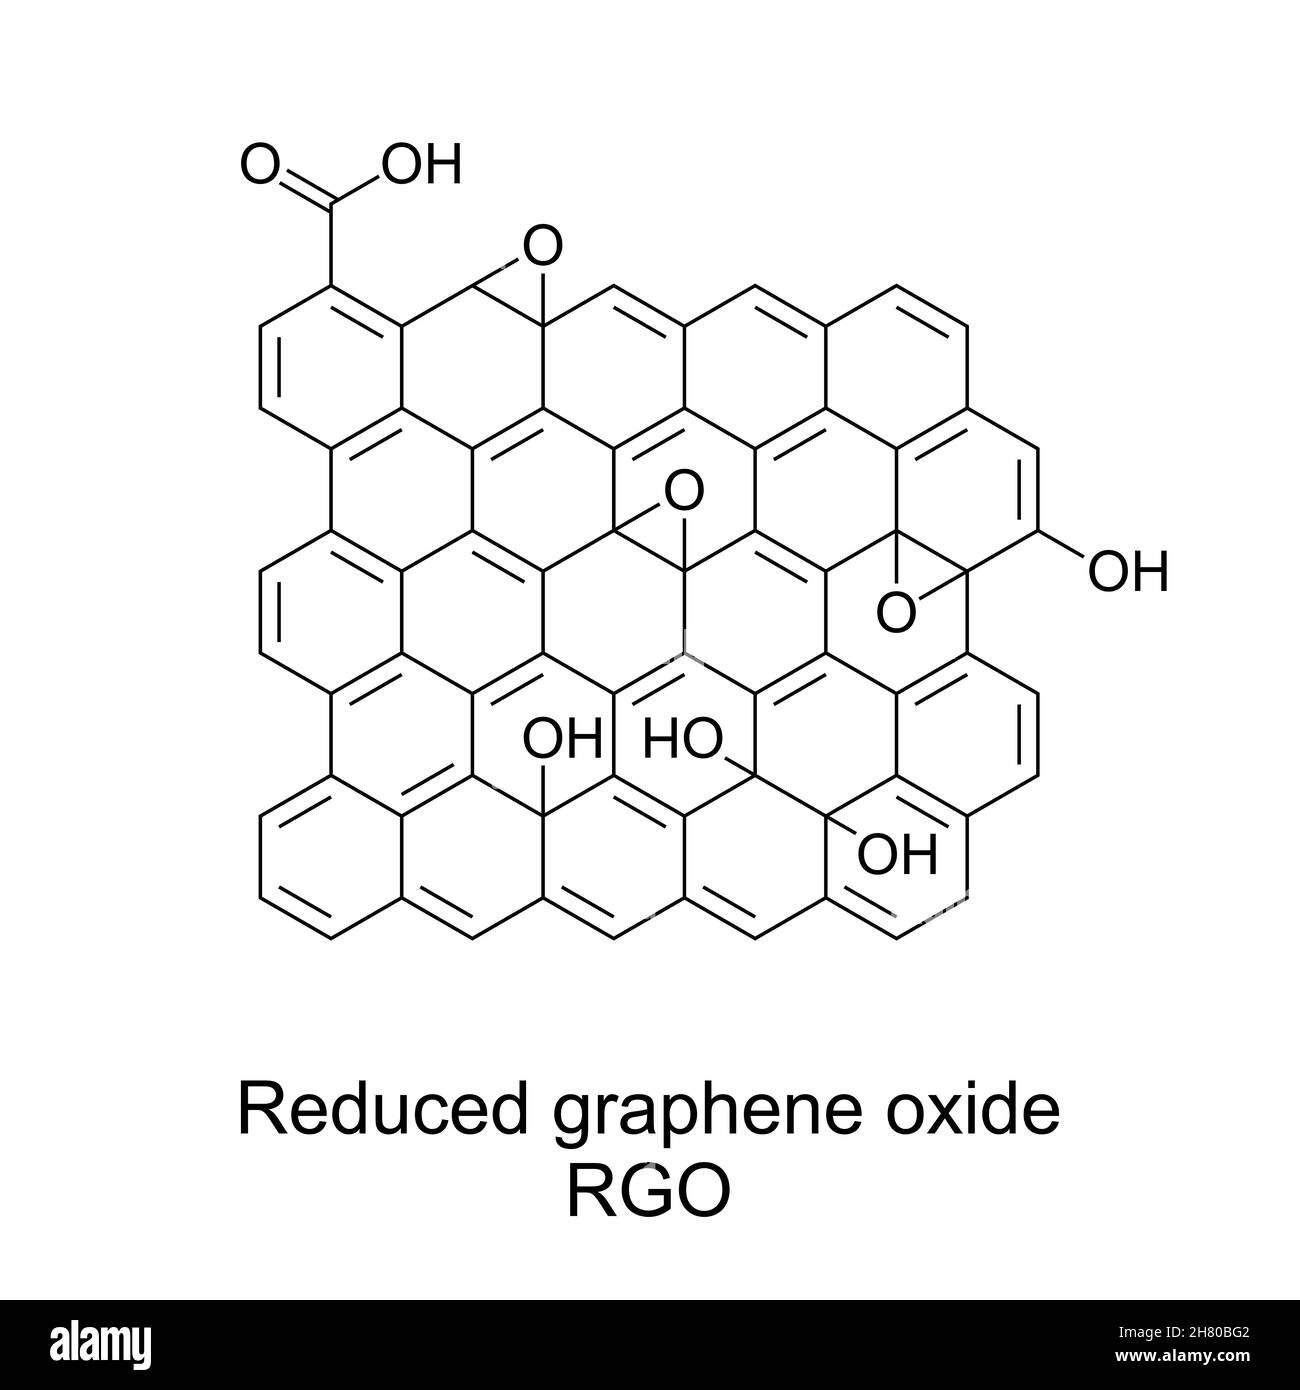 Reduced graphene oxide, RGO, chemical formula and structure. A nanomaterial, made by the reduction of graphene oxide. Single-atomic layered material. Stock Photo